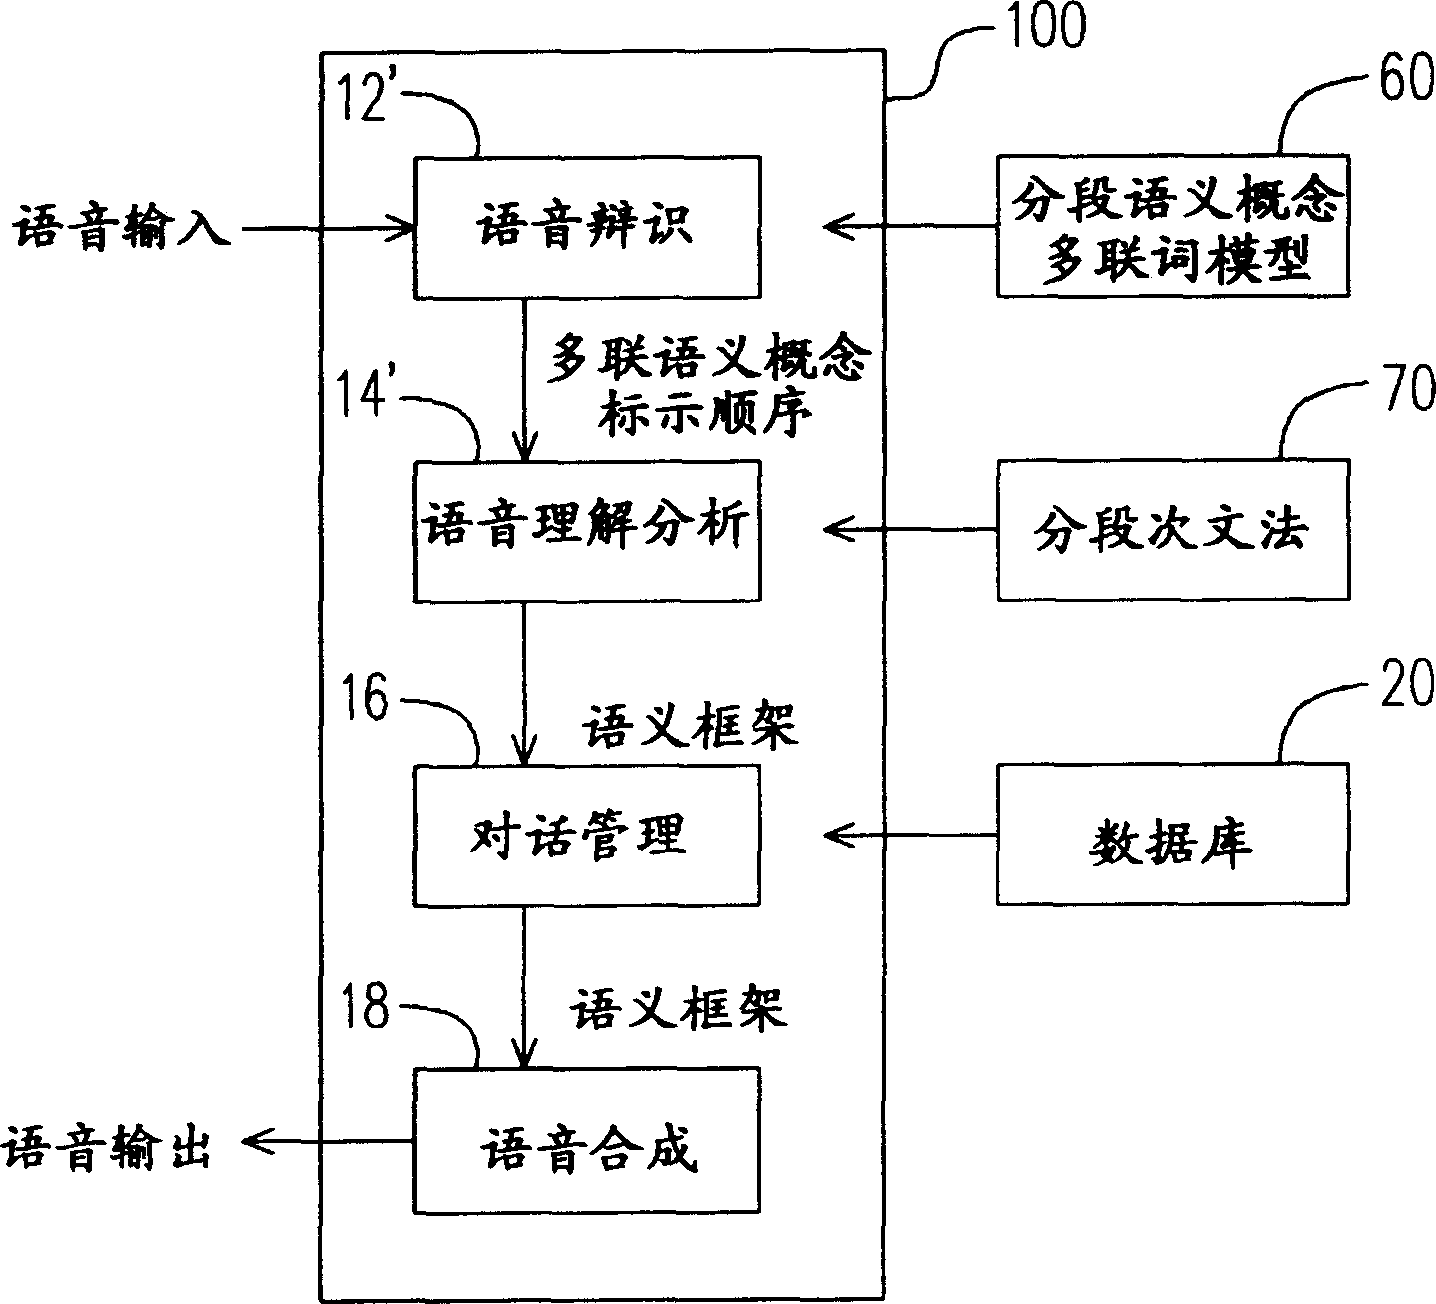 Method and device for voice identification and language comprehension analysing